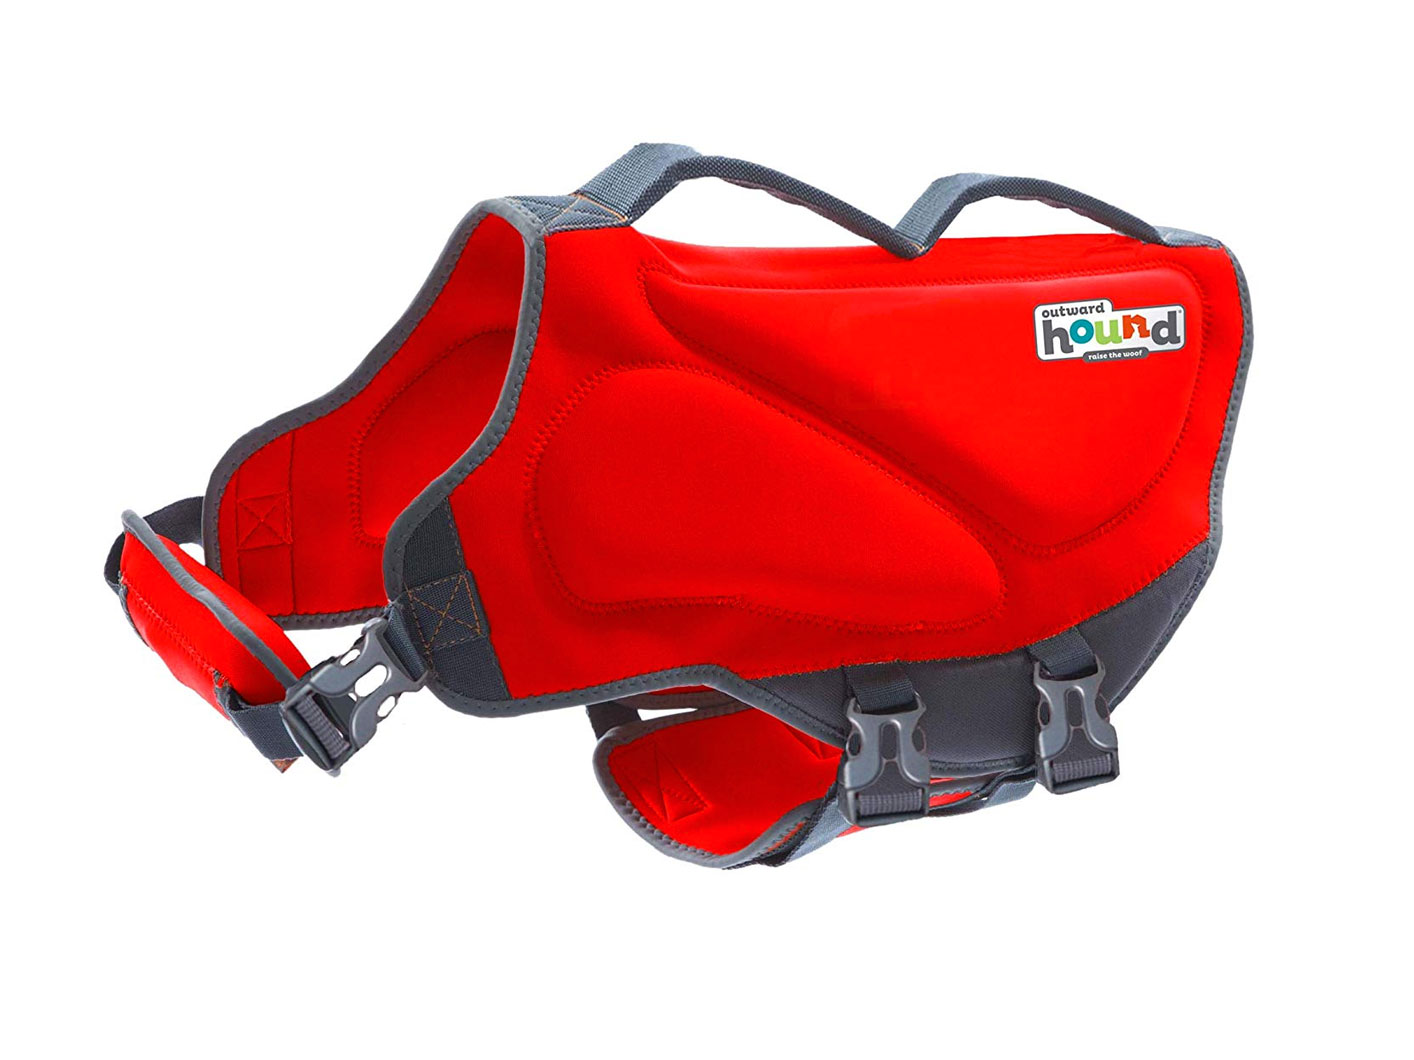 Outward Bound red doggie lifevest with handles